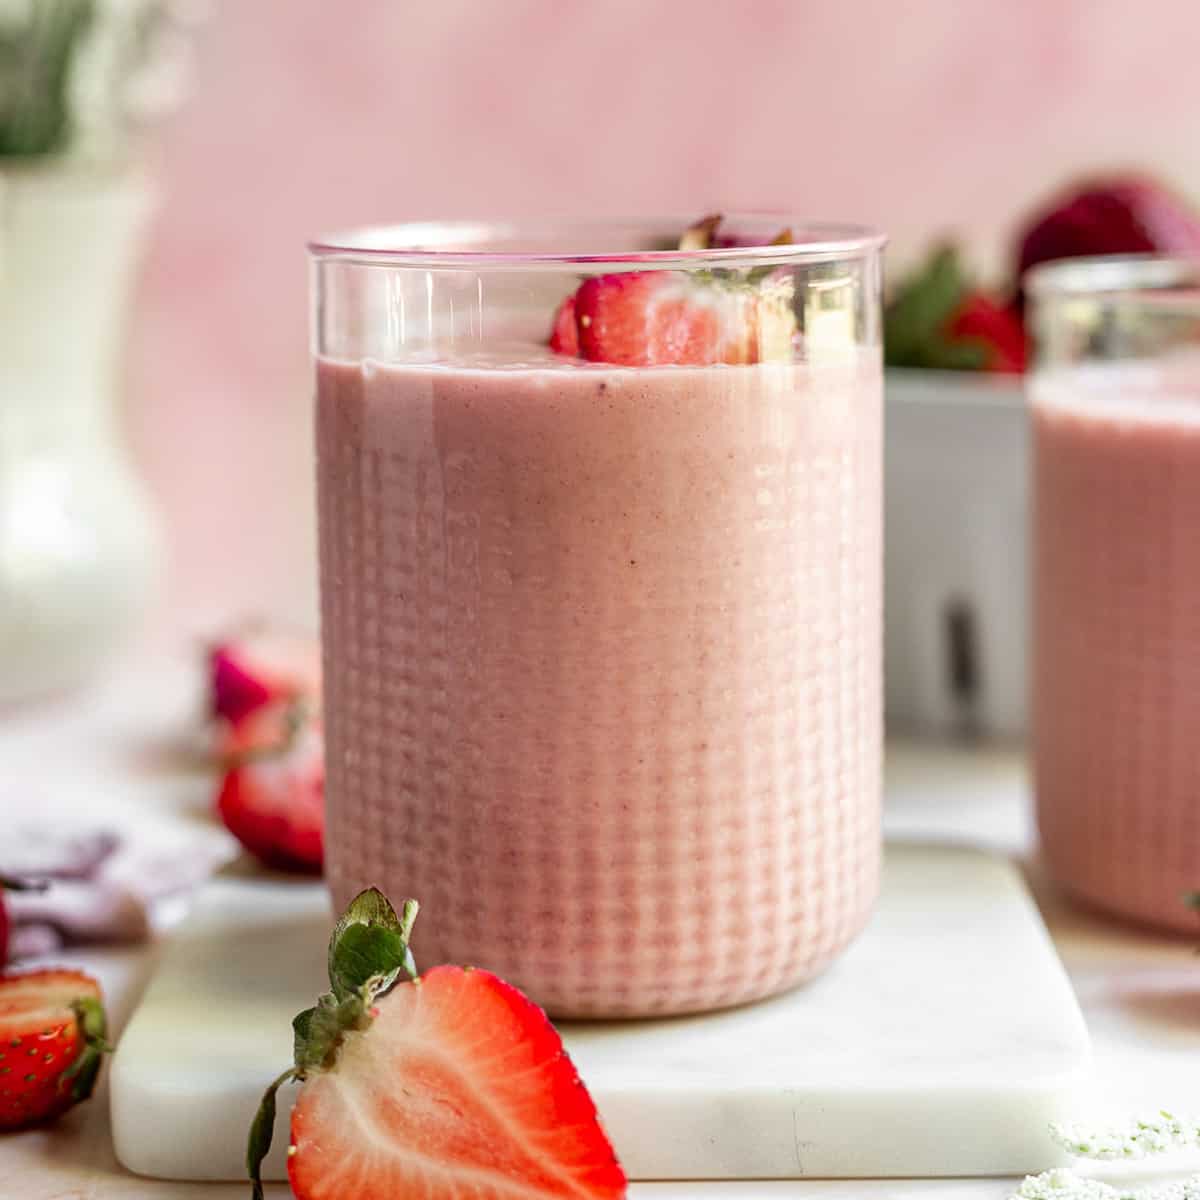 Strawberry banana peanut butter smoothie